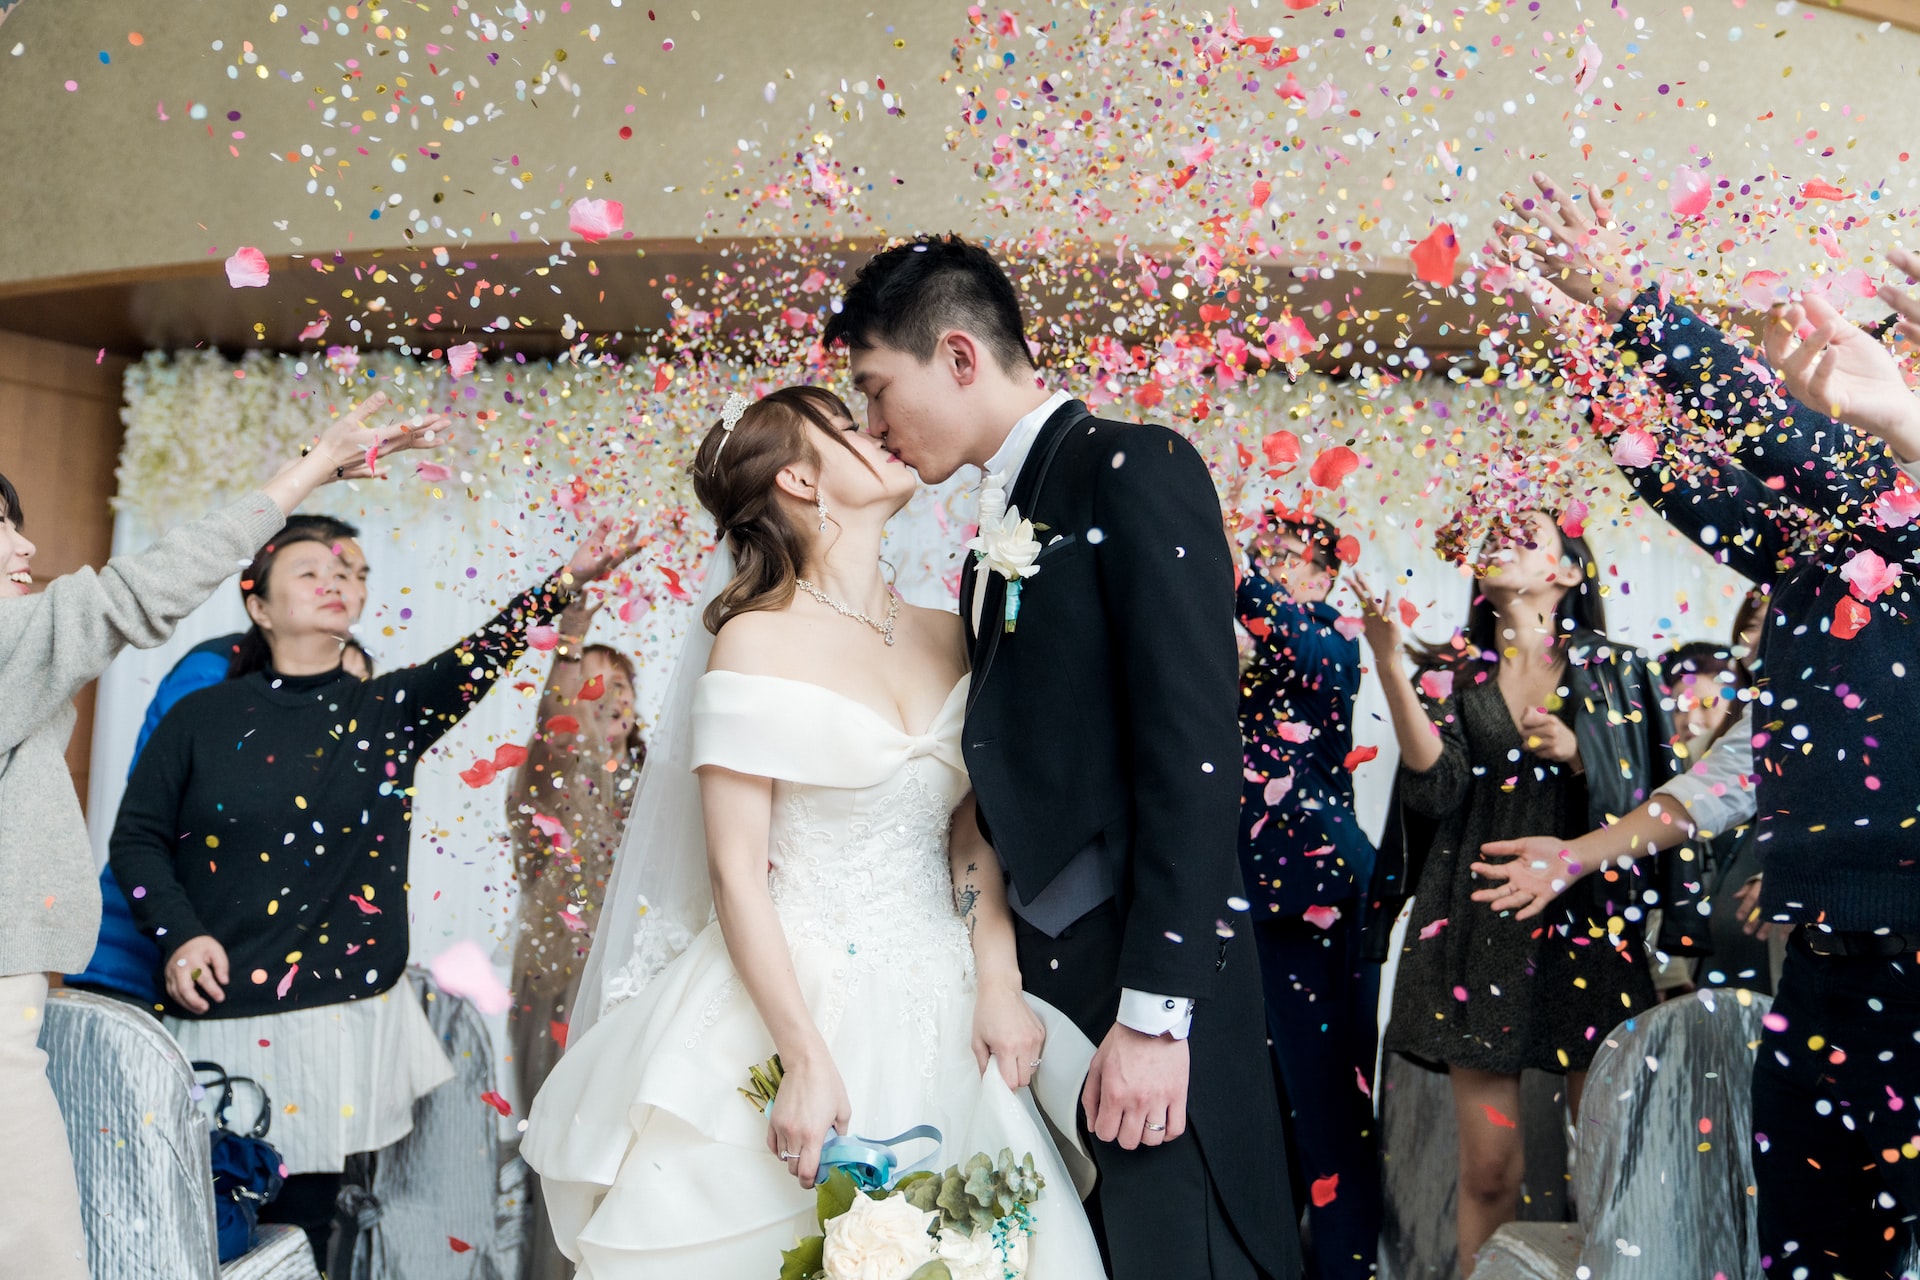 How to get that perfect wedding confetti shot on your big day!